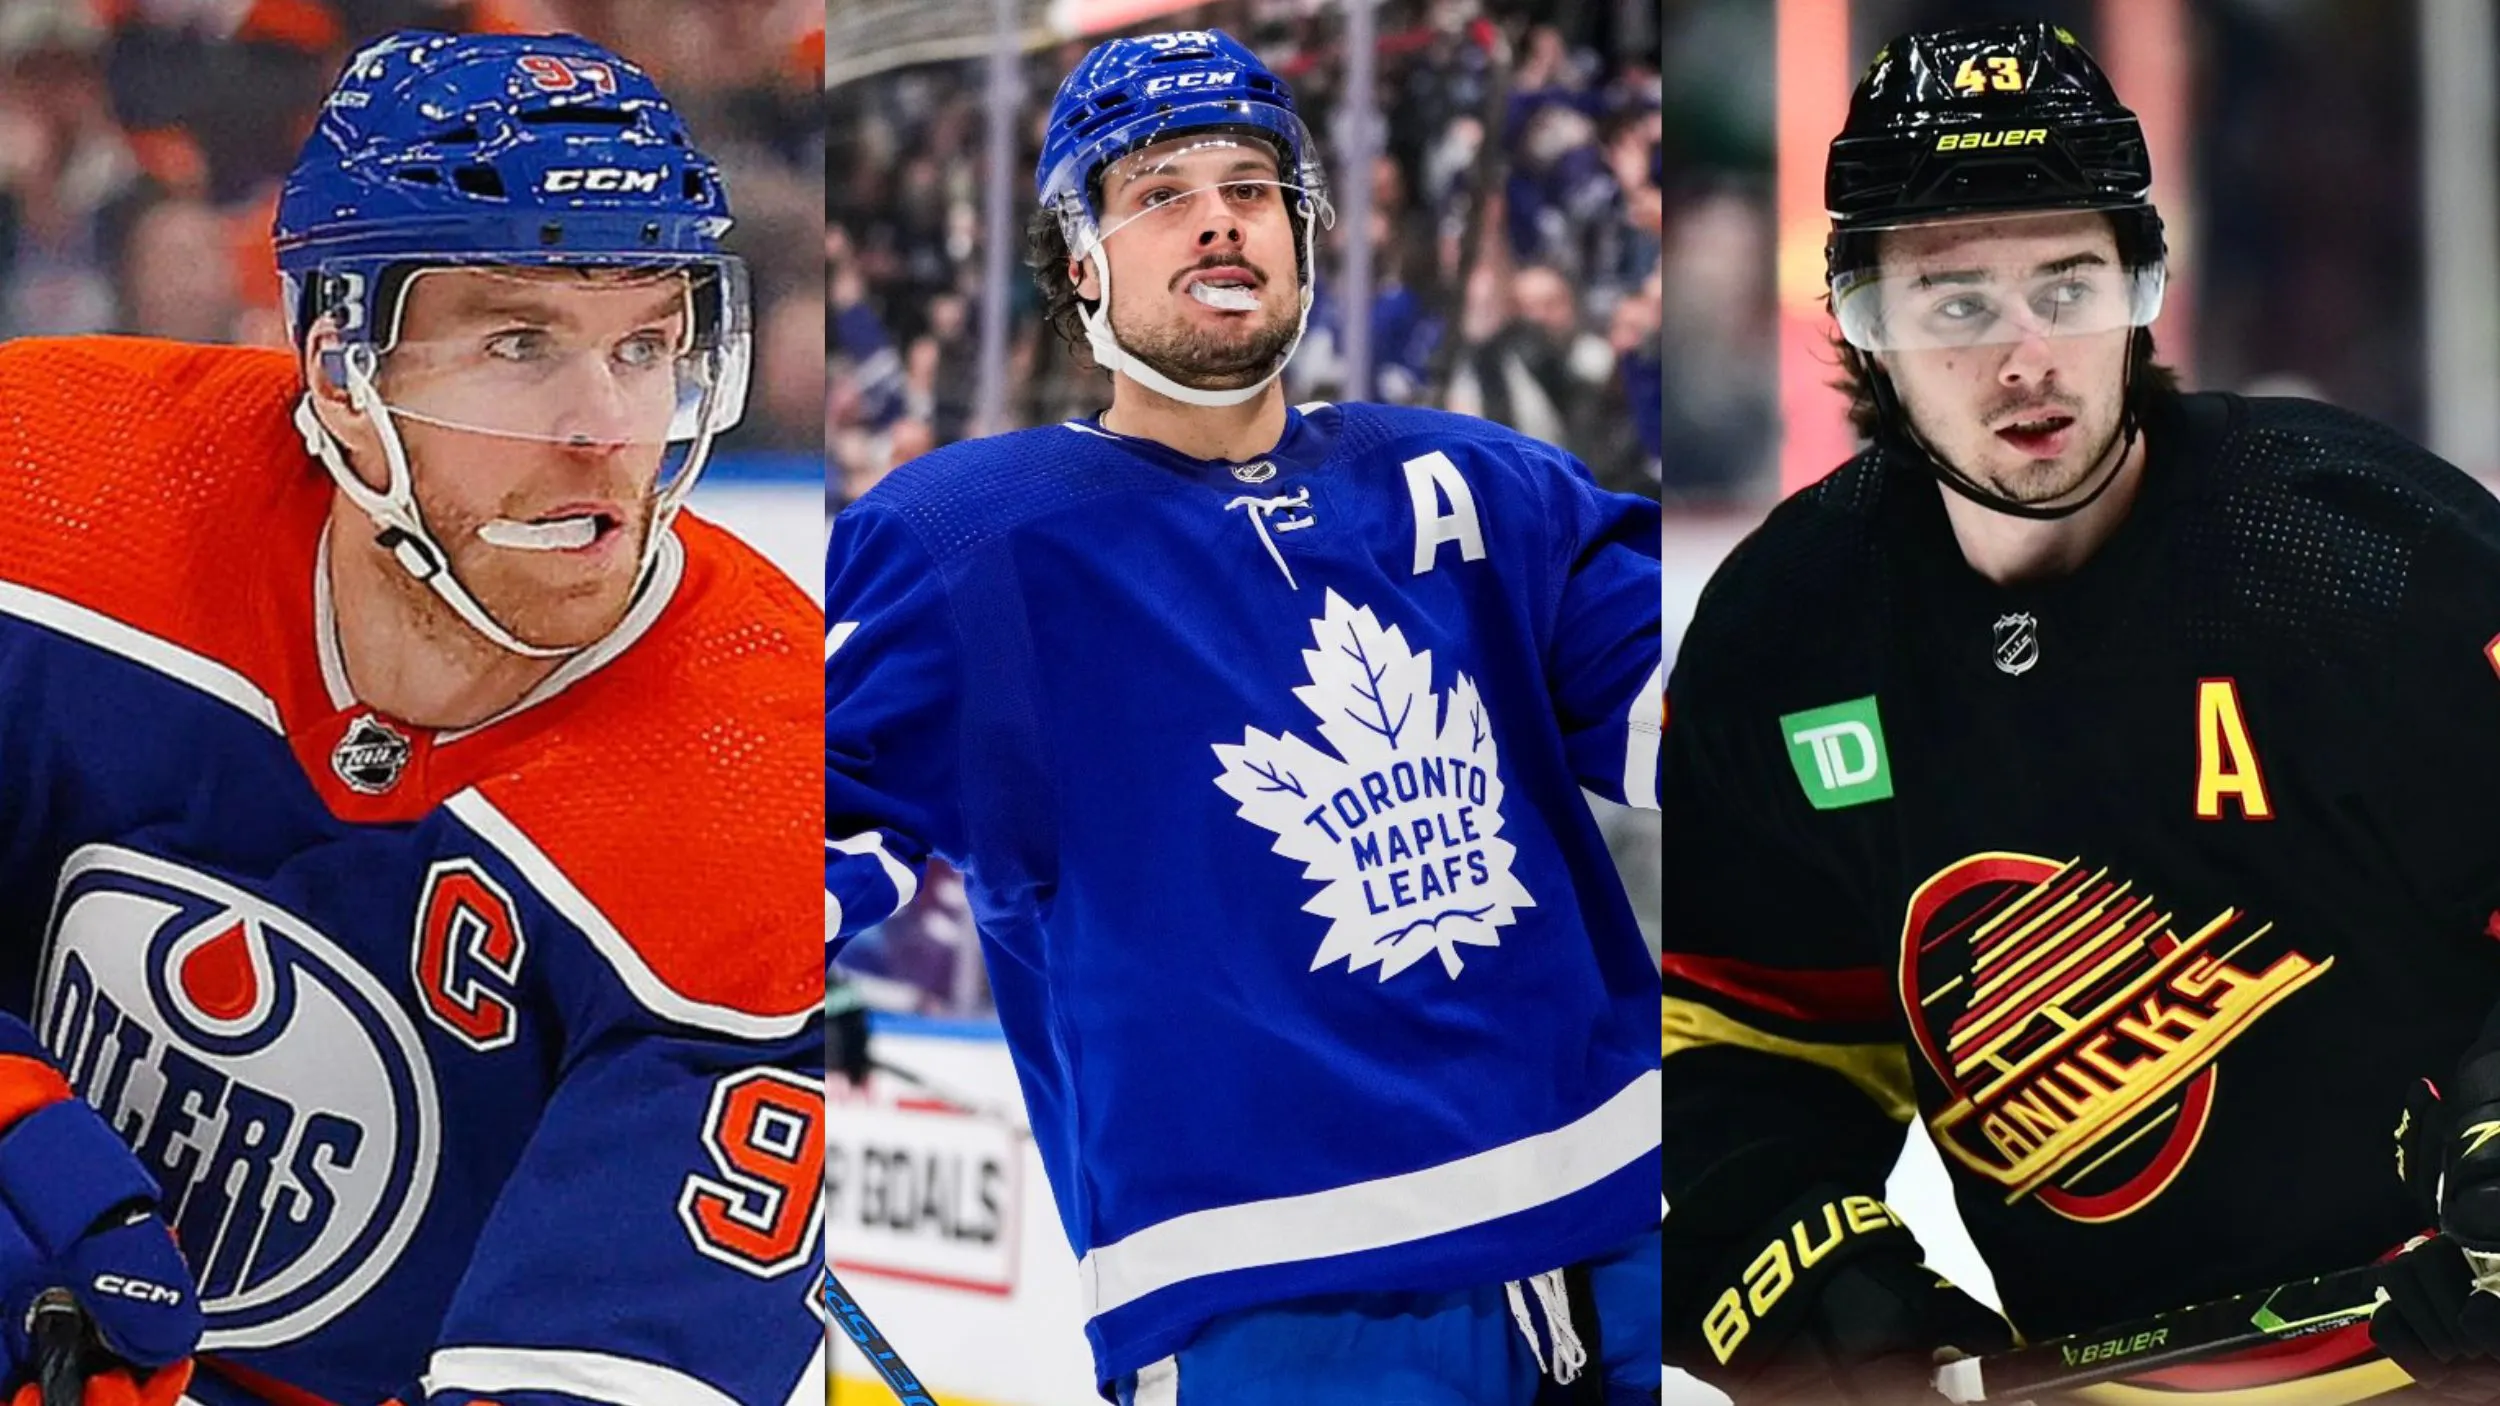 McDavid, Matthews, Hughes: Projecting Career Totals for the NHL’s Biggest Stars